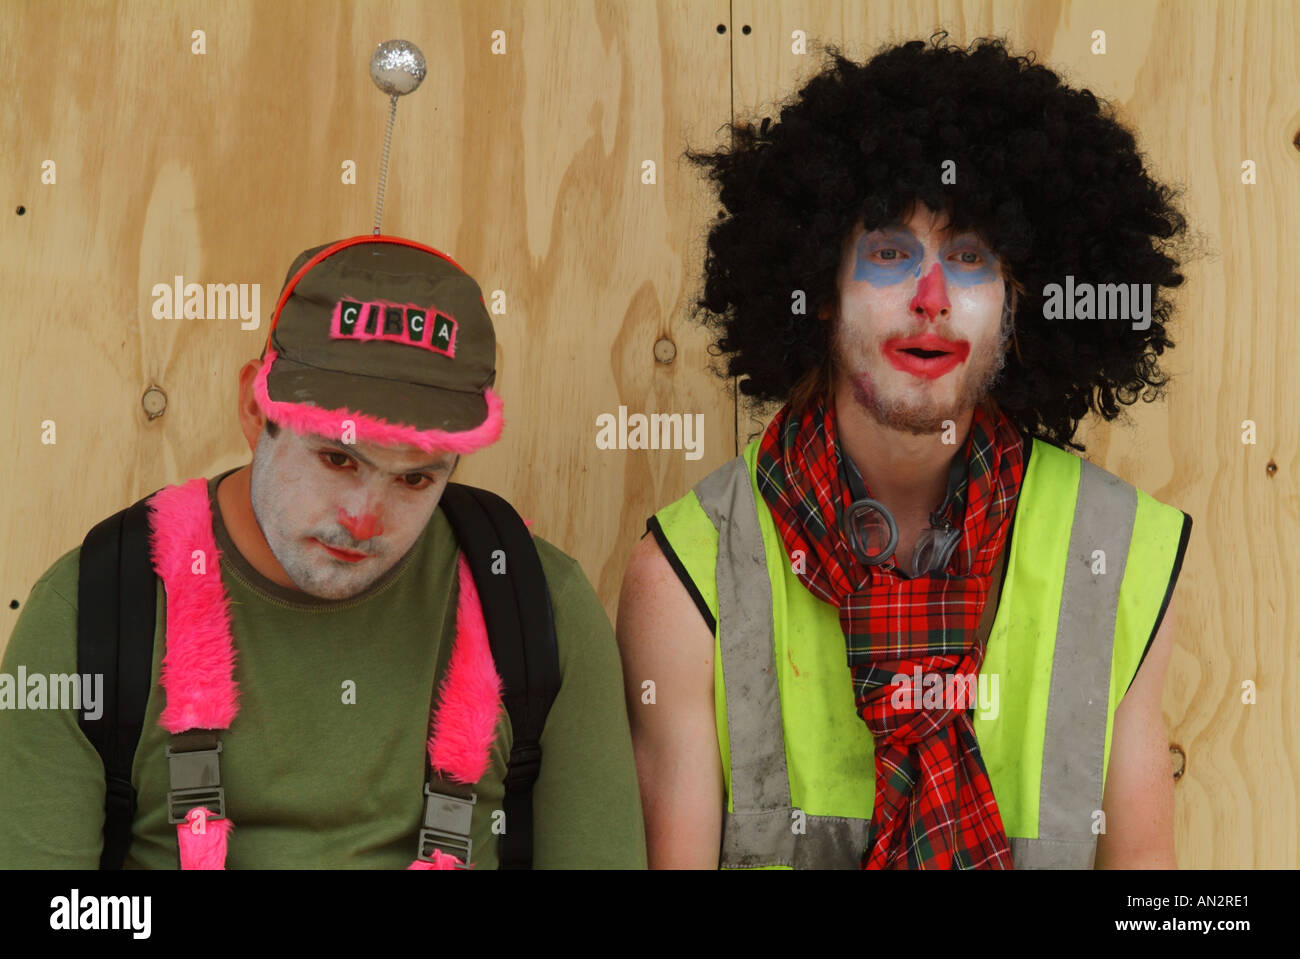 Two activists from the Clandestine Insurgent Rebel Clown Army looking dejected outside a boarded-up shop Stock Photo